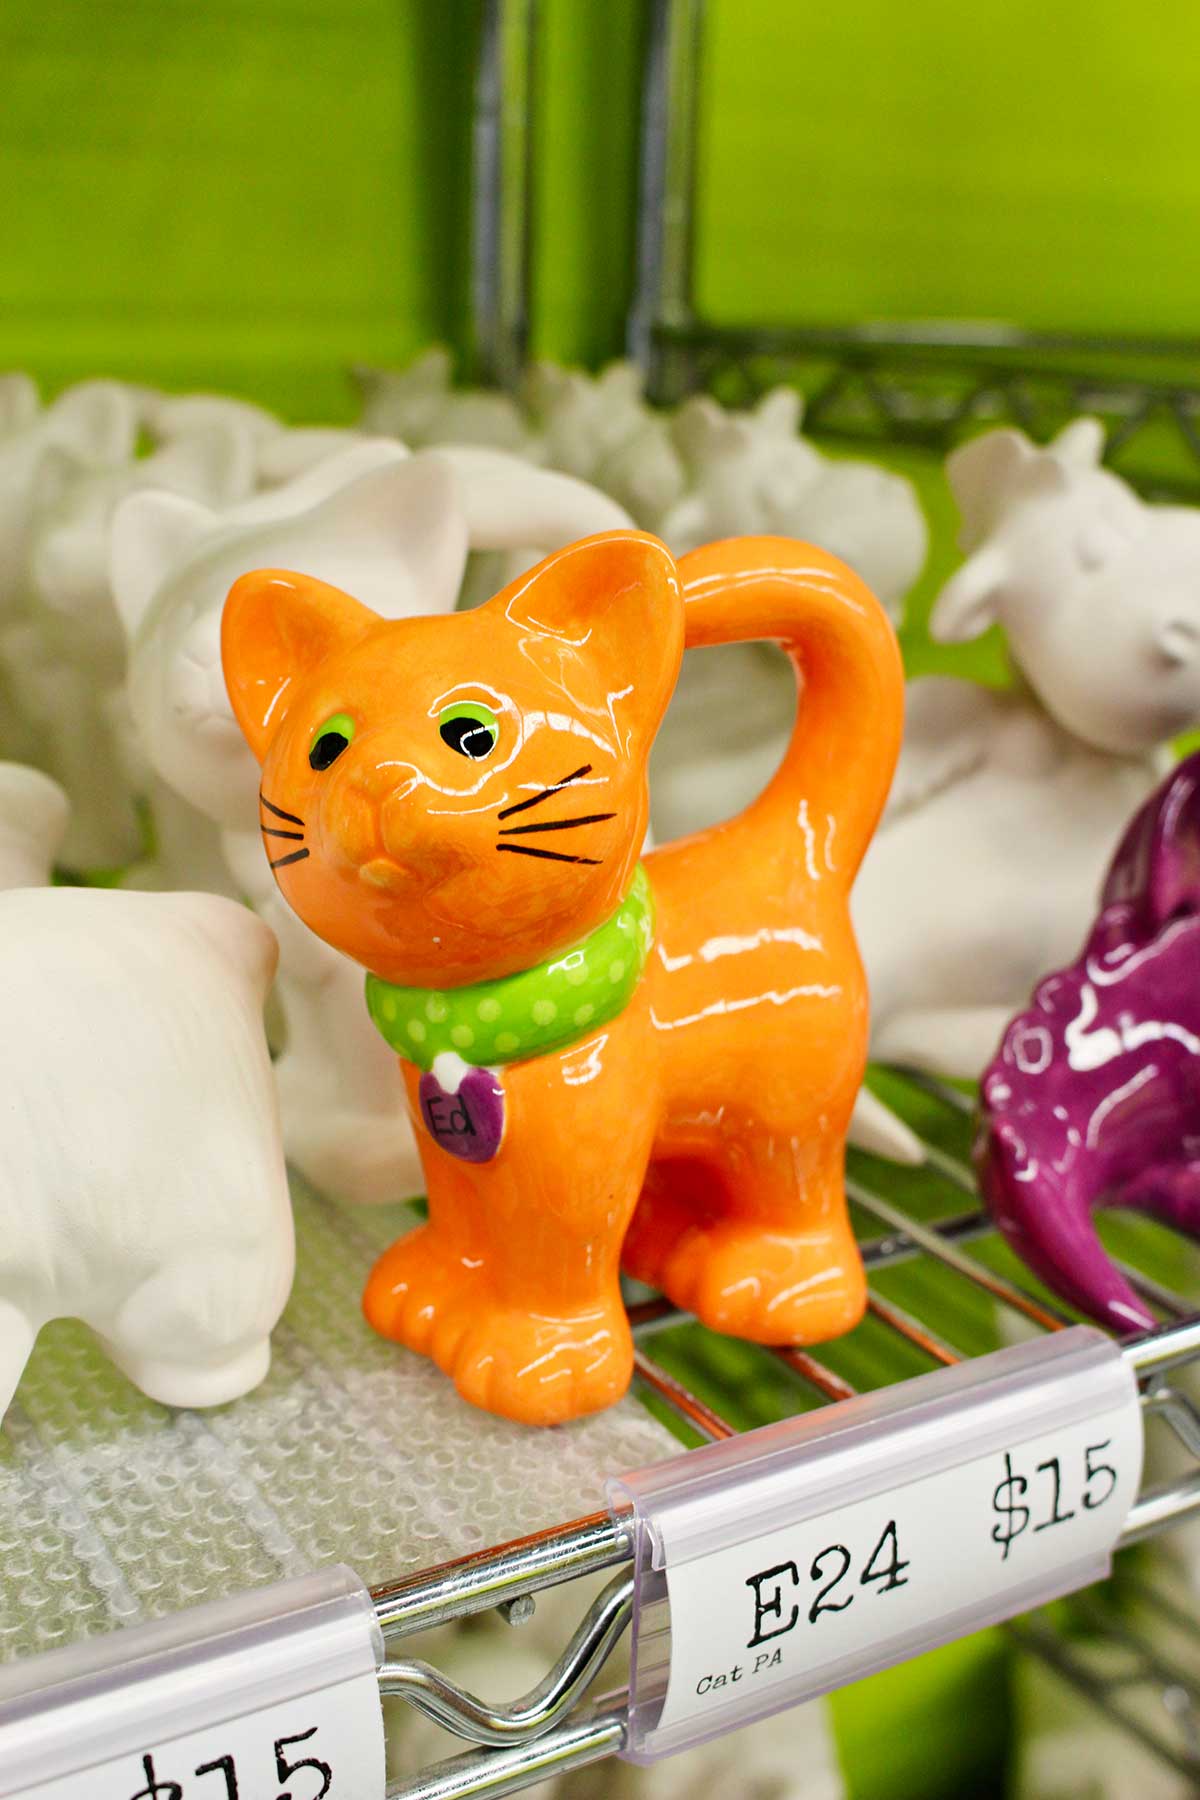 A small orange cat with green collar sample at ceramic painting studio.